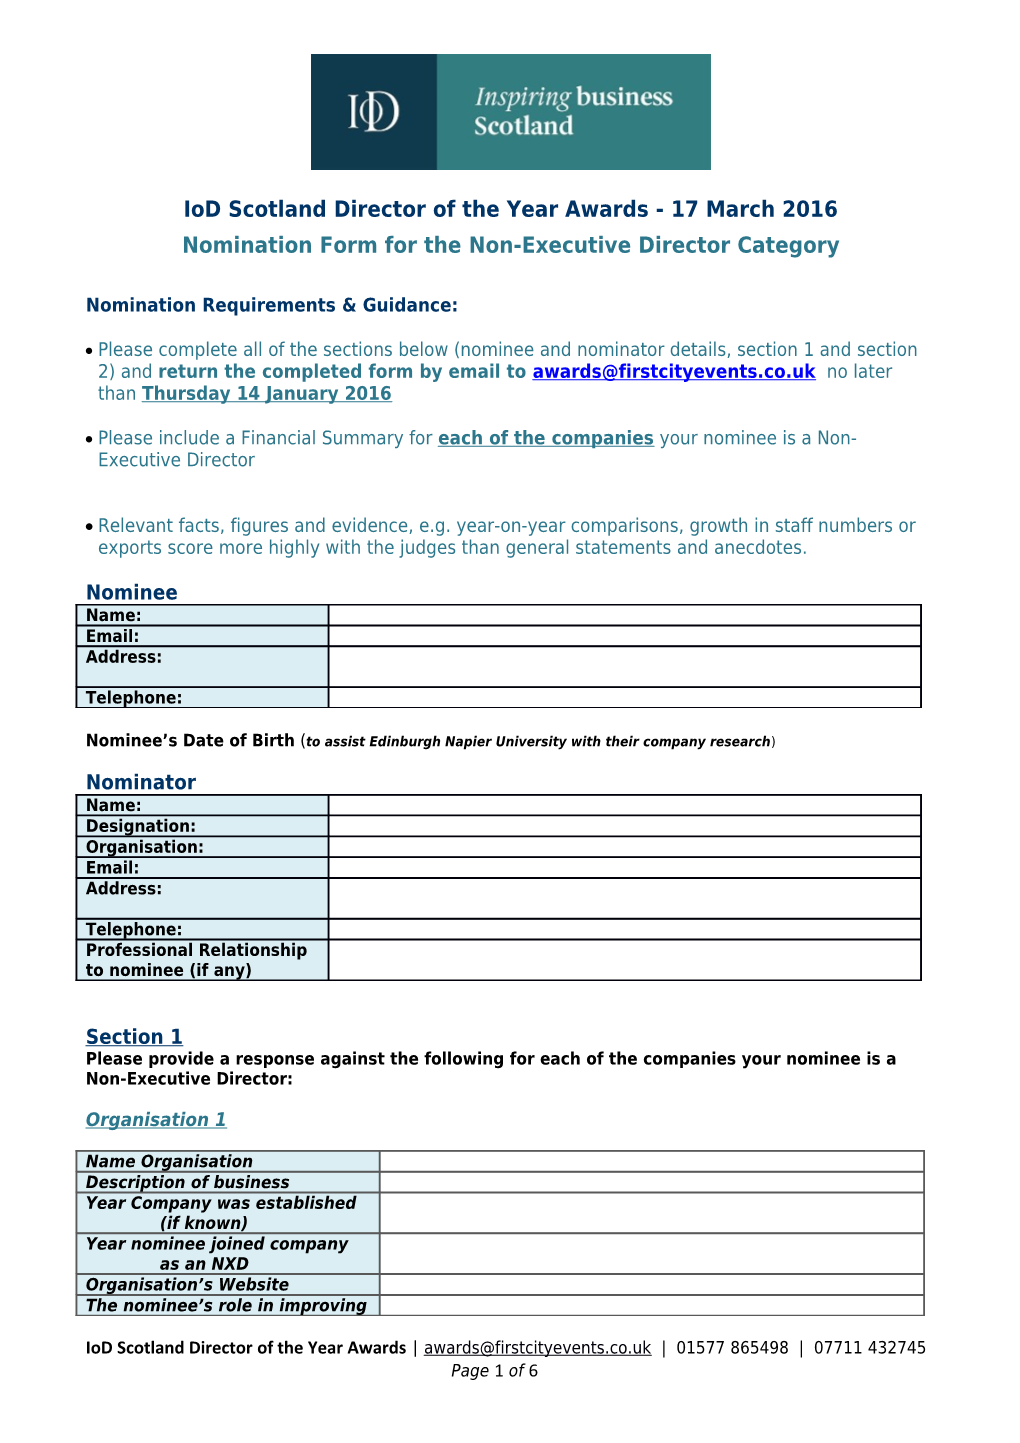 Nomination Form for the Non-Executive Director Category